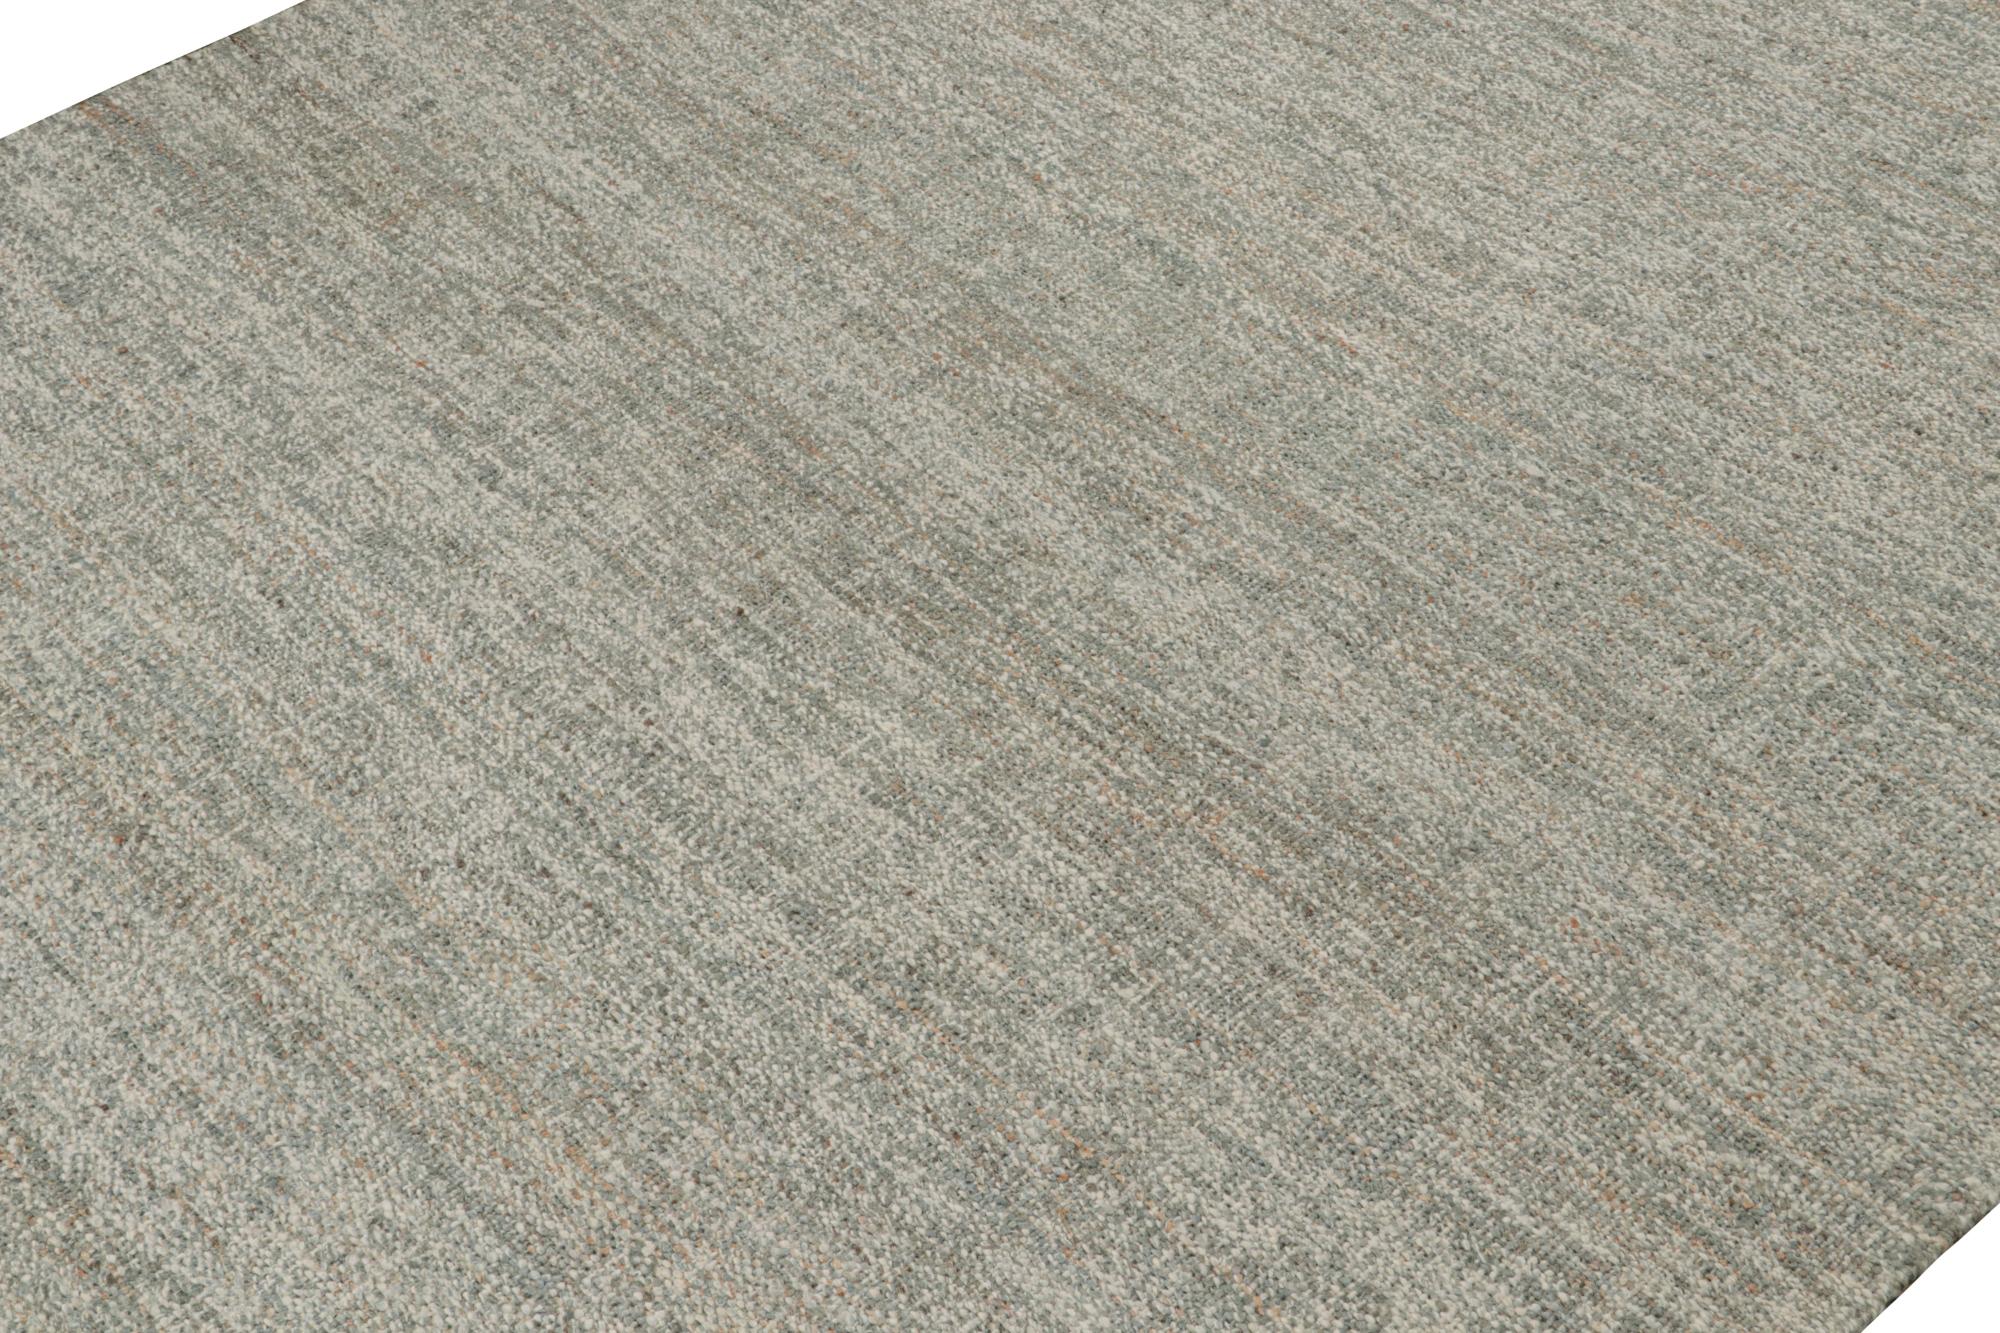 This 10x14 flatweave in contemporary design belongs to Rug & Kilim’s brand new collection - all handwoven in jute.

On the Design: 

The kilim rug enjoys a tasteful boucle-like texture and sense of movement for a more modern take on plain rugs.